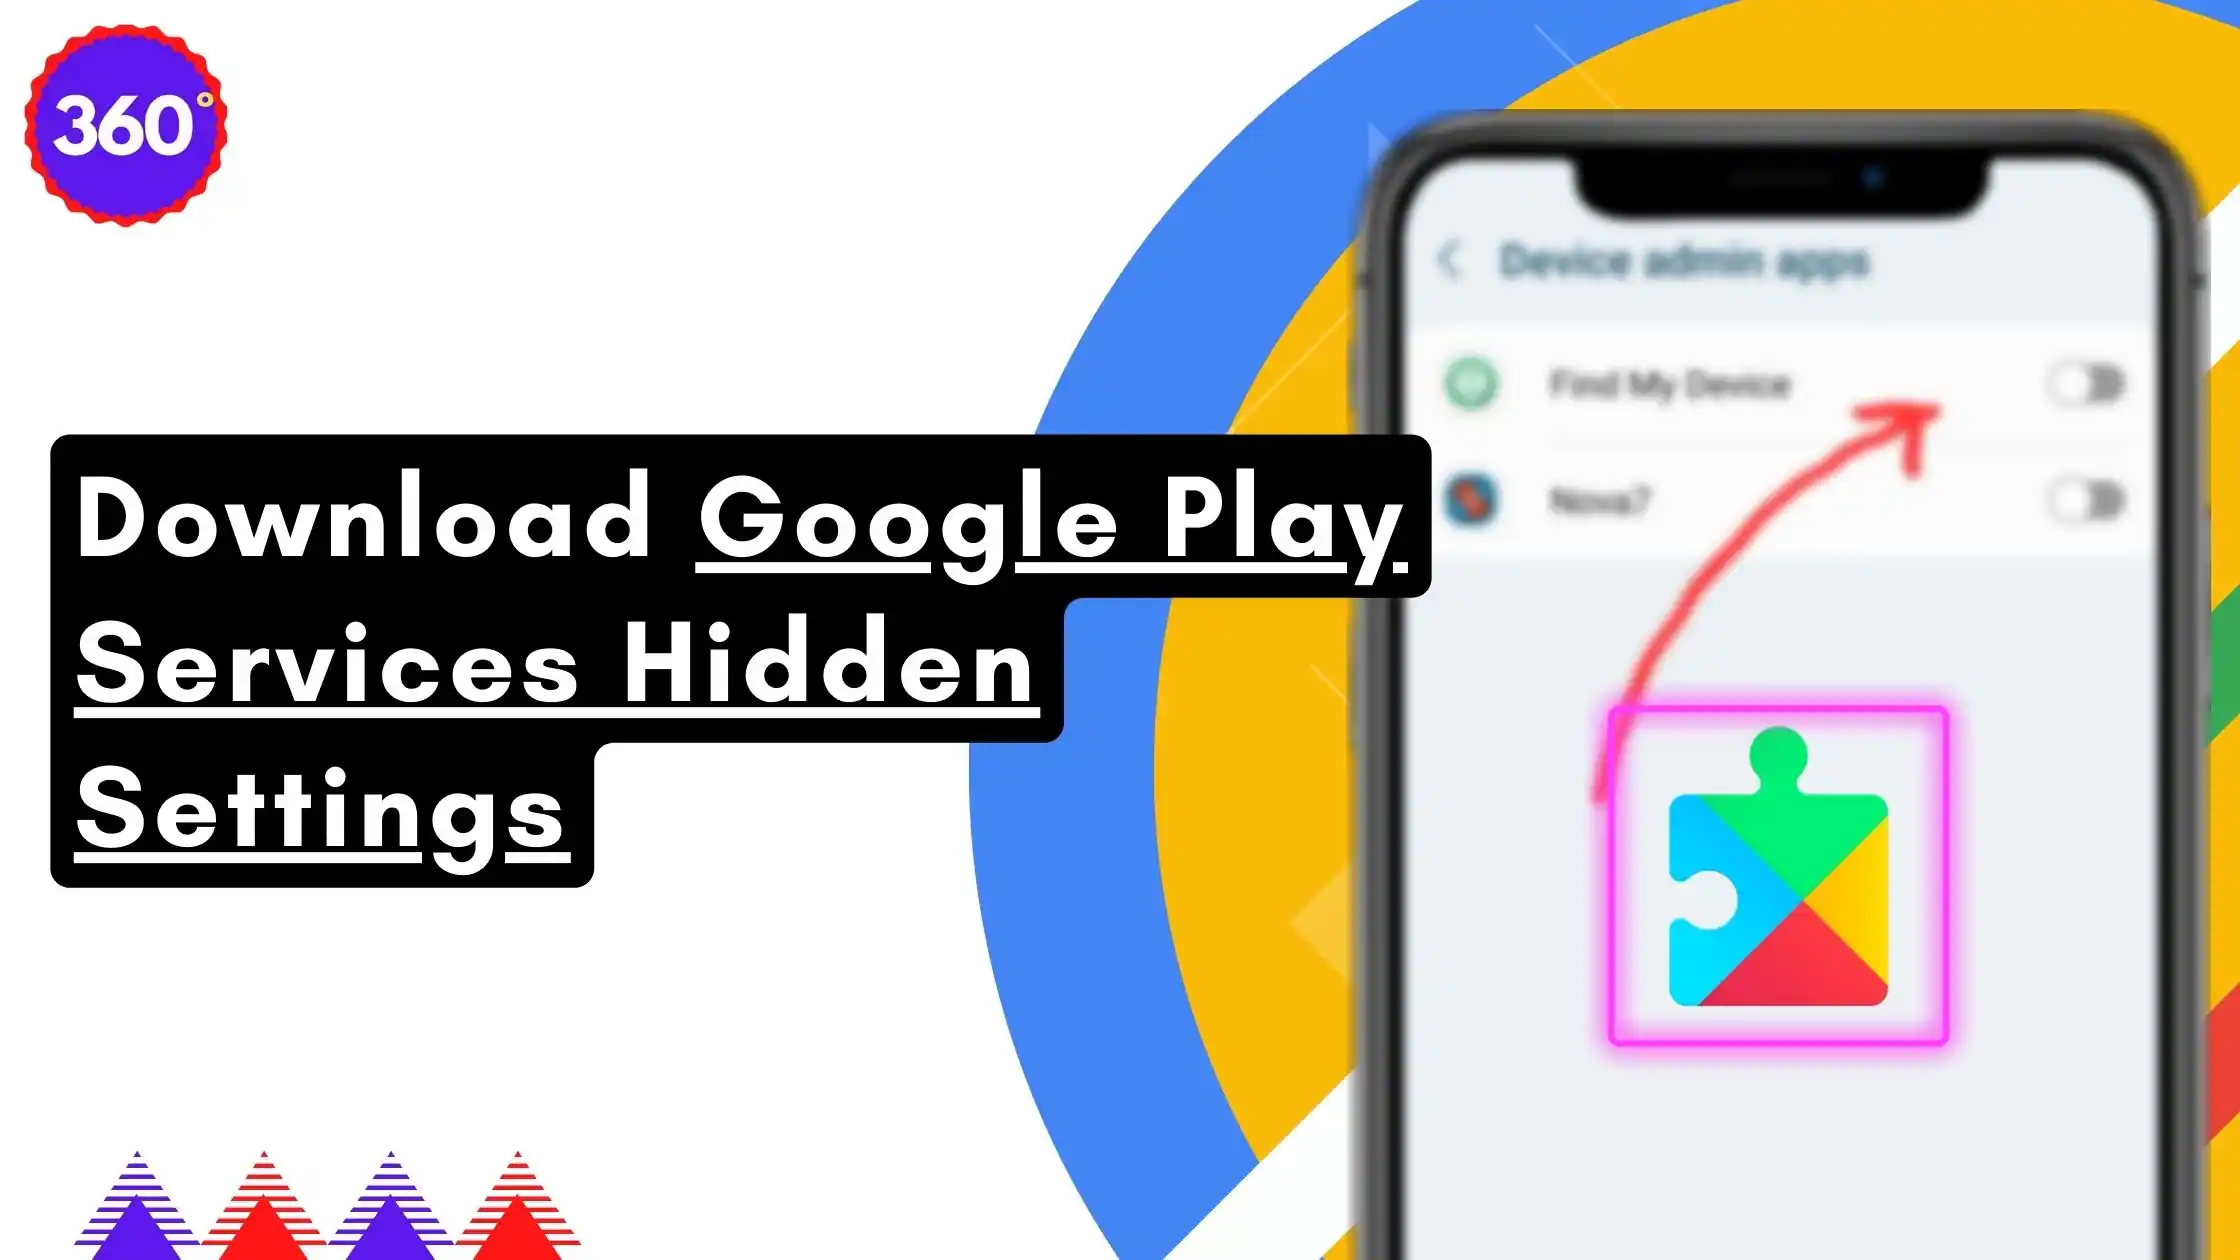 Download Hidden Settings of Google Play Services (update)